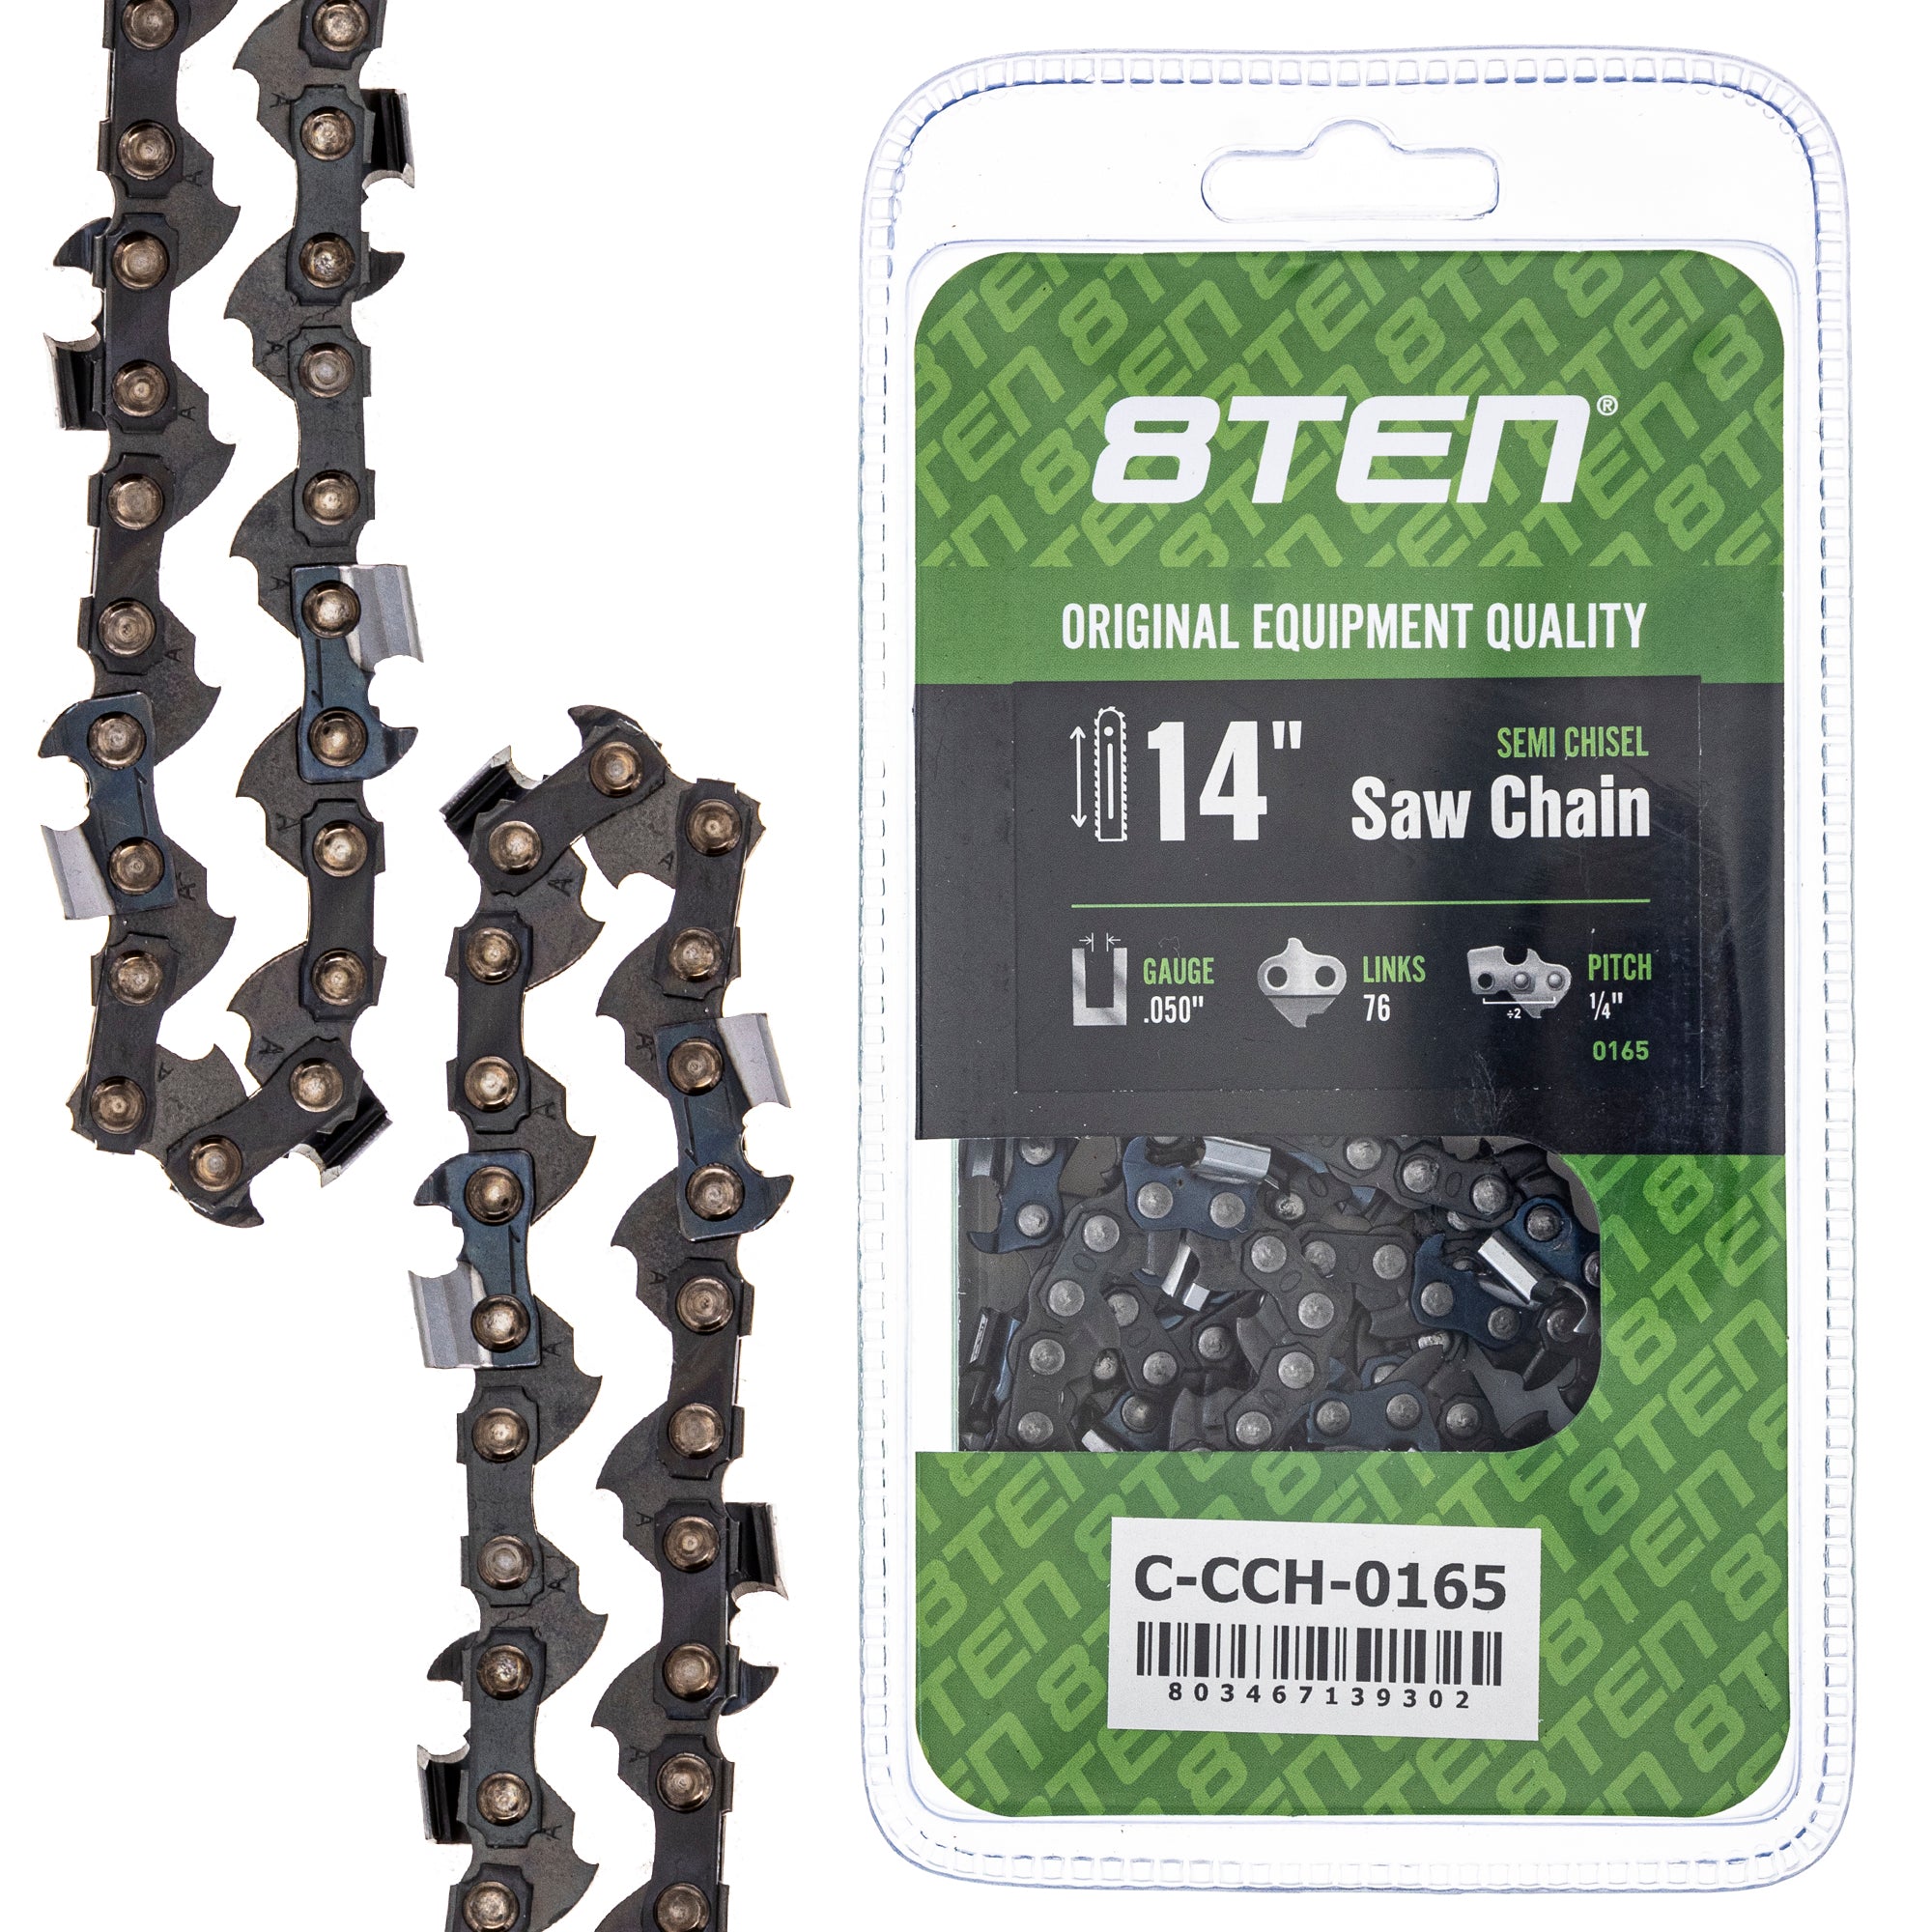 Chainsaw Chain 14 Inch .050 1/4 76DL for zOTHER 8TEN 810-CCC2387H